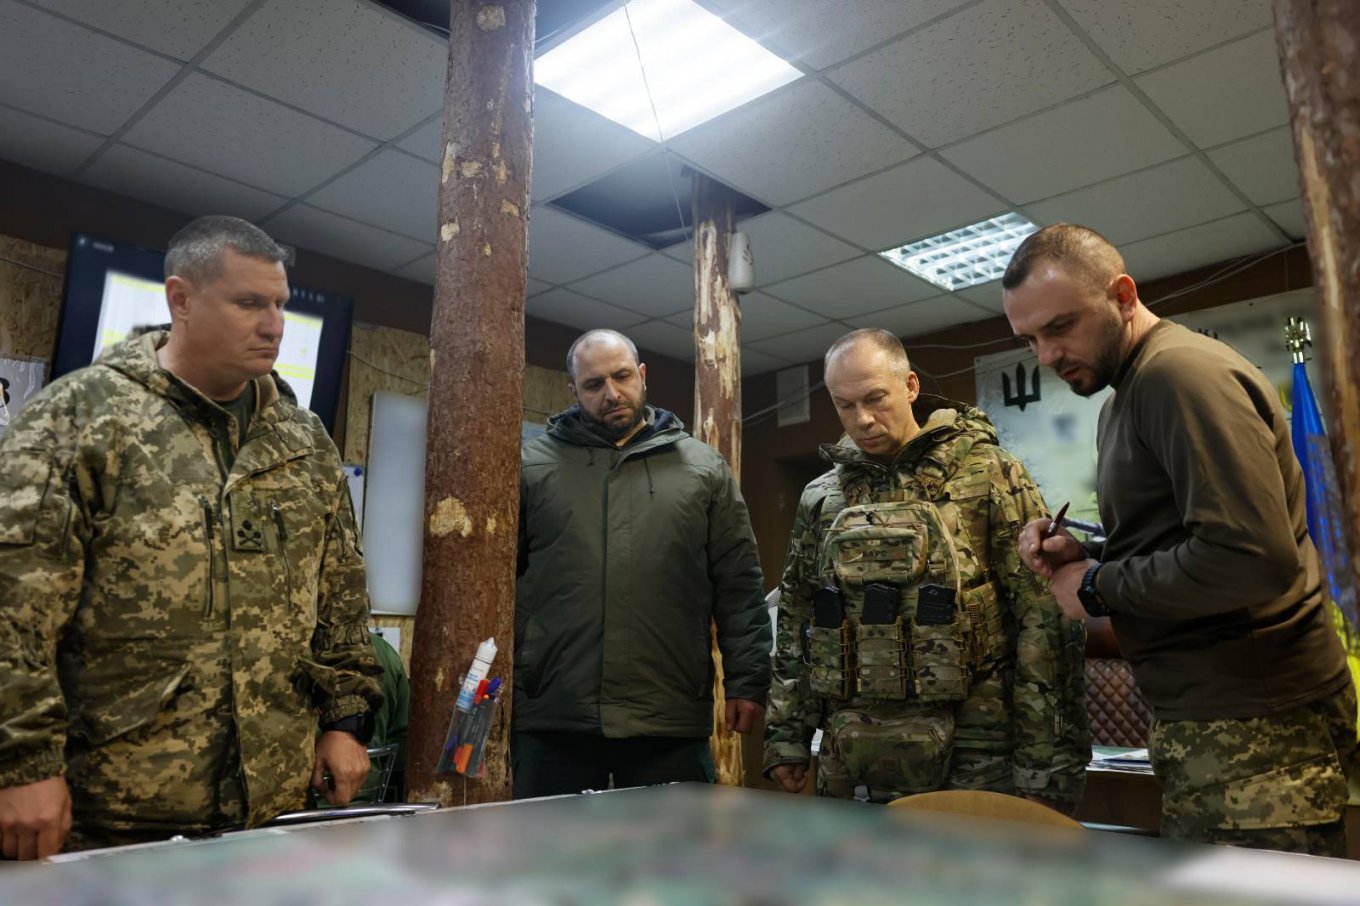 Commander-in-Chief of the Armed Forces of Ukraine Oleksandr Syrskii together with Minister of Defense of Ukraine Rustem Umerov visited the frontline, Defense Express